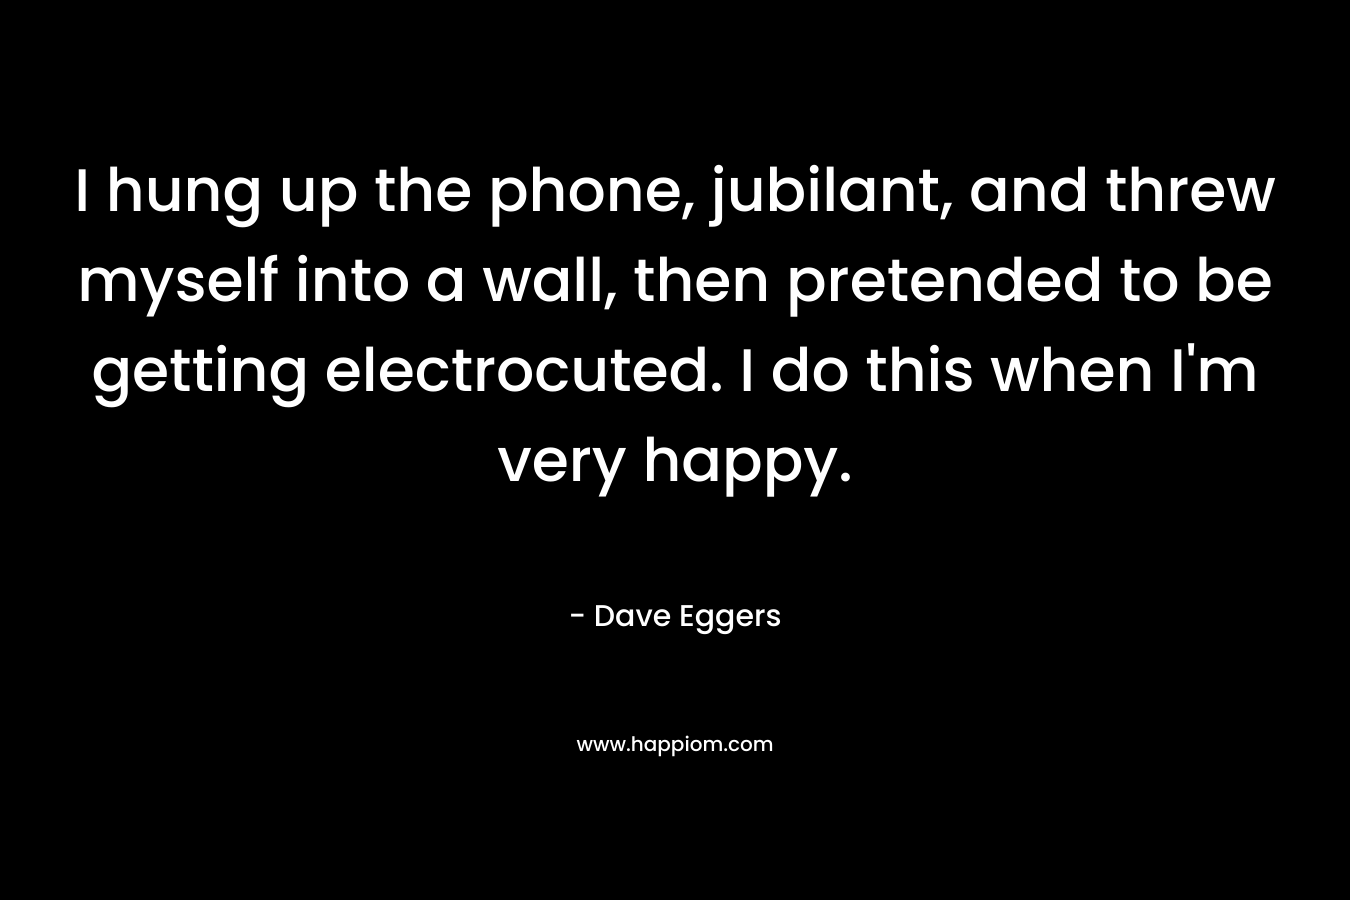 I hung up the phone, jubilant, and threw myself into a wall, then pretended to be getting electrocuted. I do this when I'm very happy.